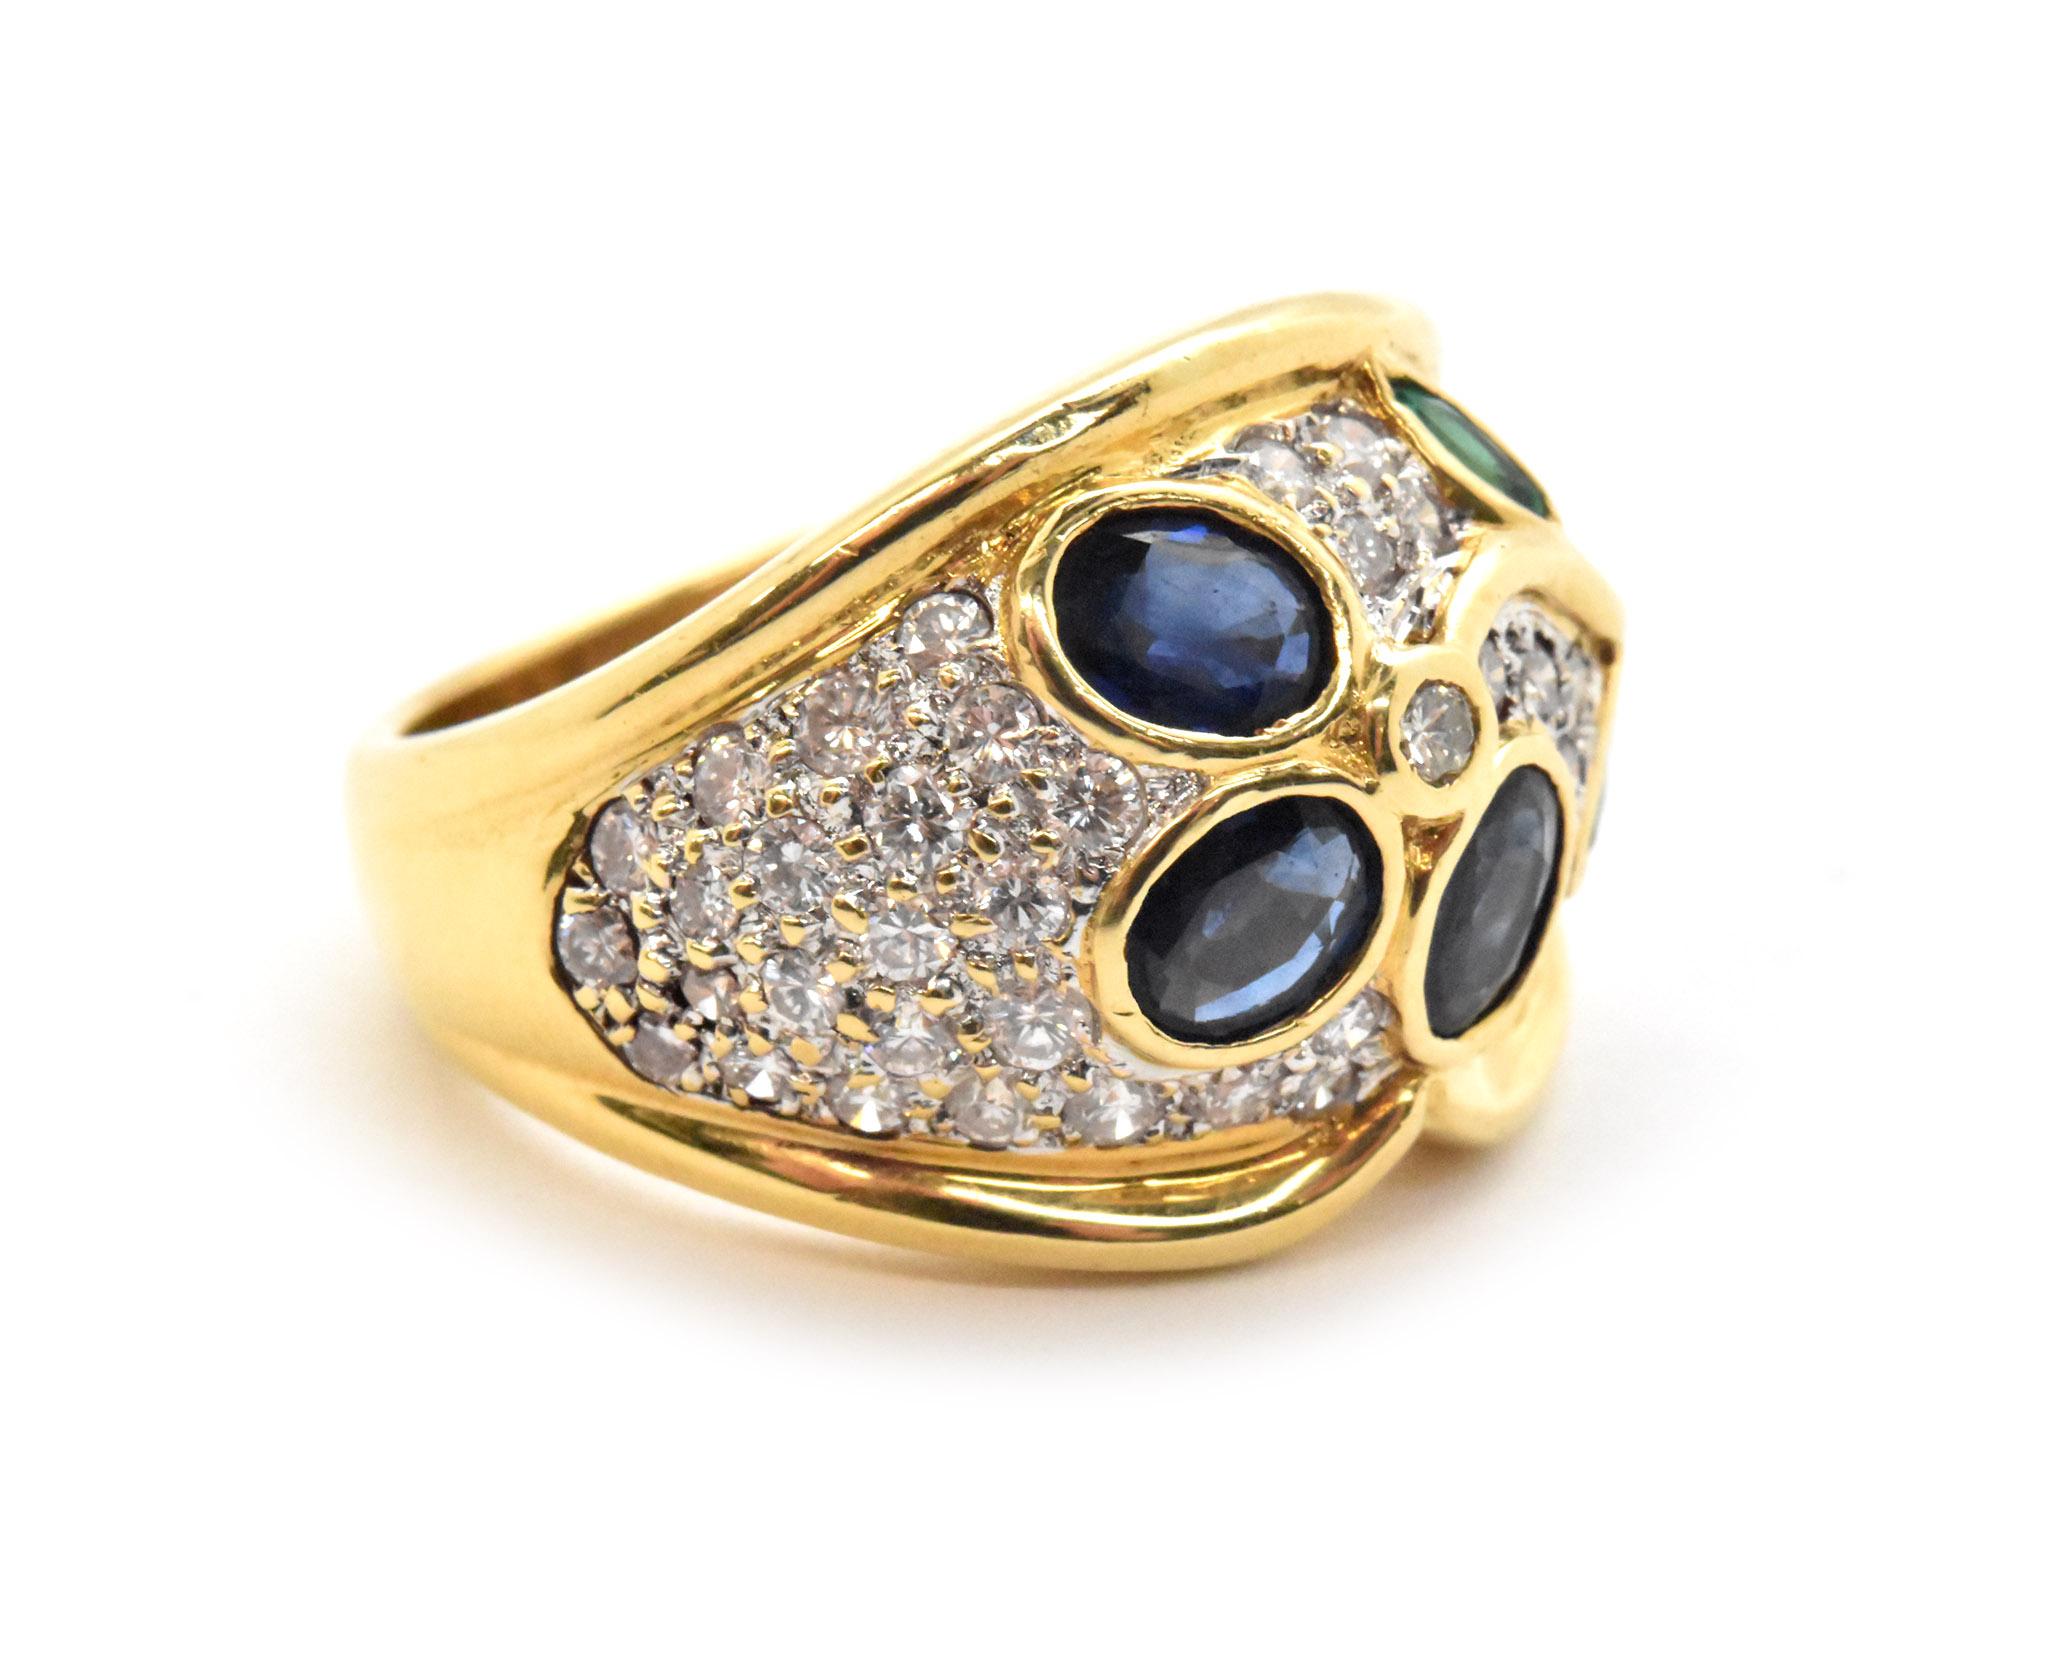 This fashion ring is made in 18k yellow gold and set with gemstones, diamonds on this ring are set across the head of the ring. Diamonds on this ring are round brilliant cut, and reach a total carat weight of 0.98. Sapphires and emeralds are also